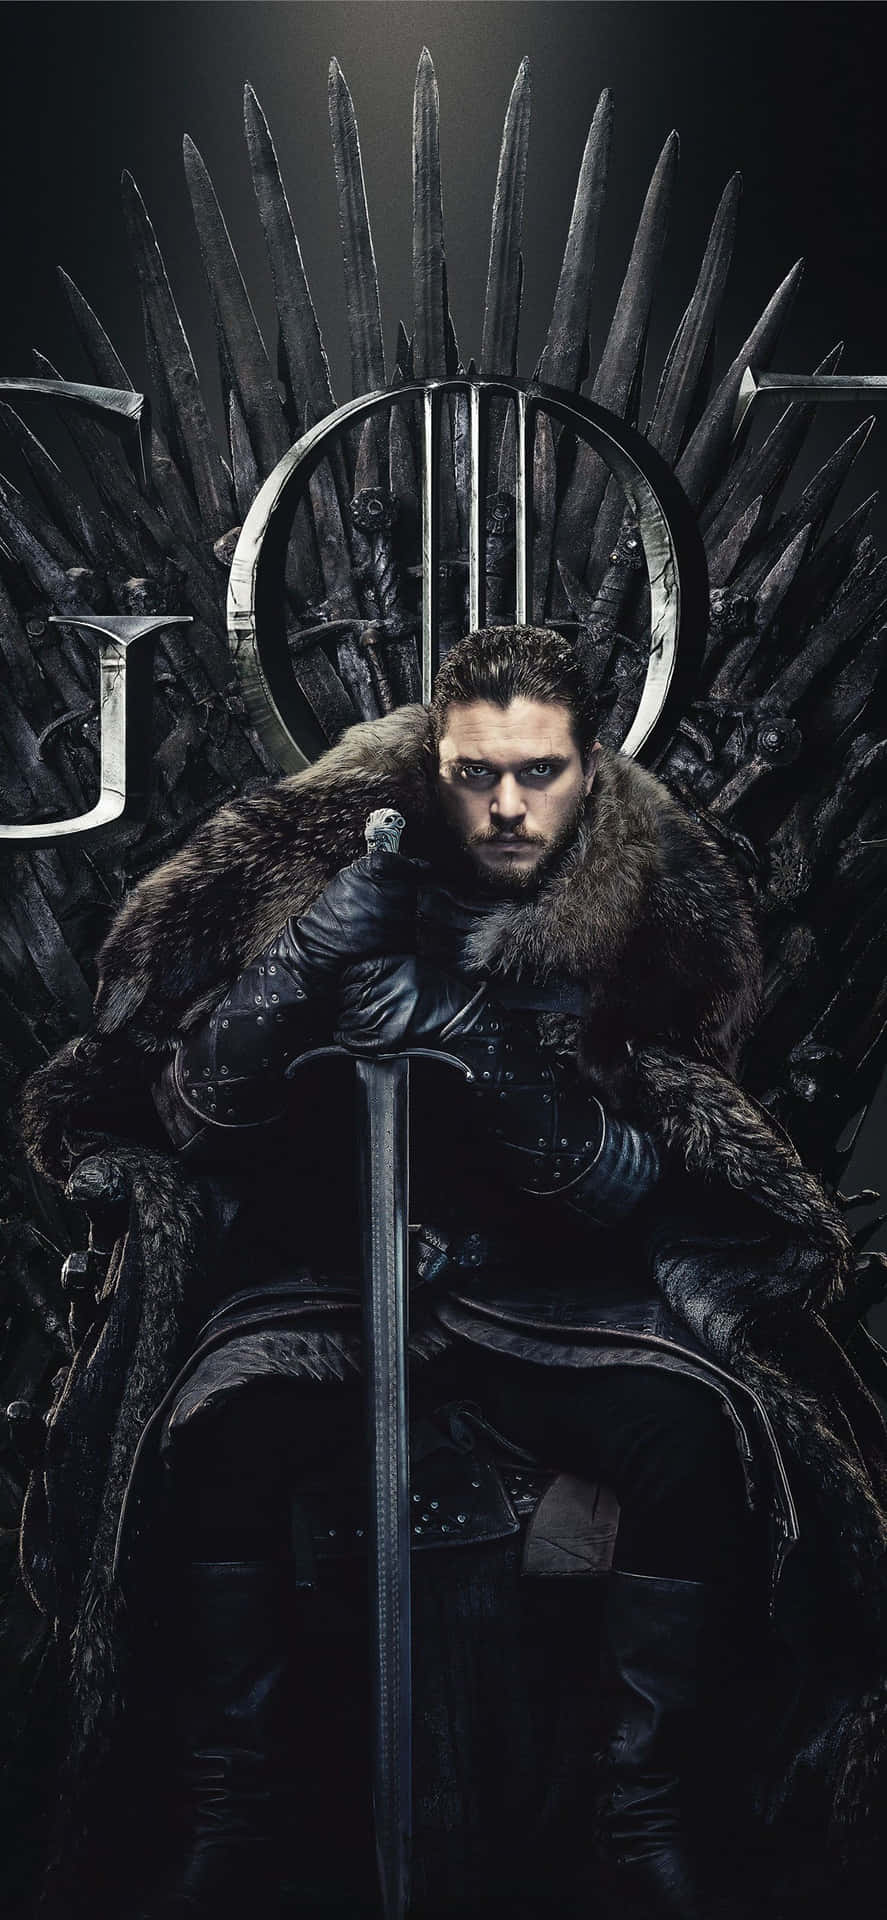 Upgrade Your Phone With The Epic Game Of Thrones Design Wallpaper